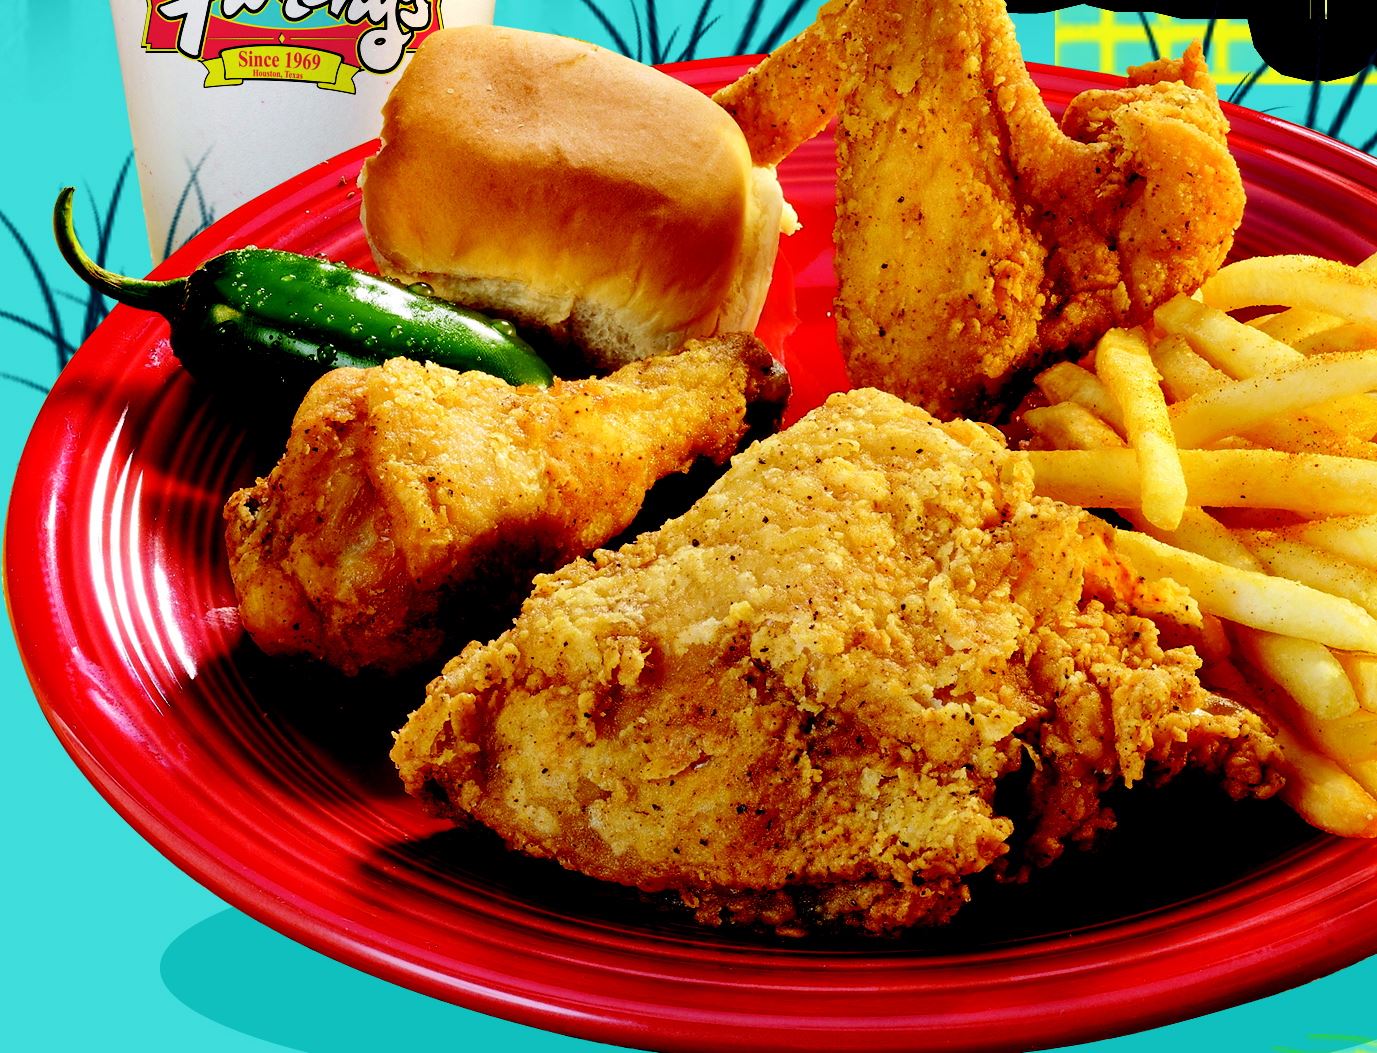 Frenchy’s fried chicken with french fries, roll, and jalapeno